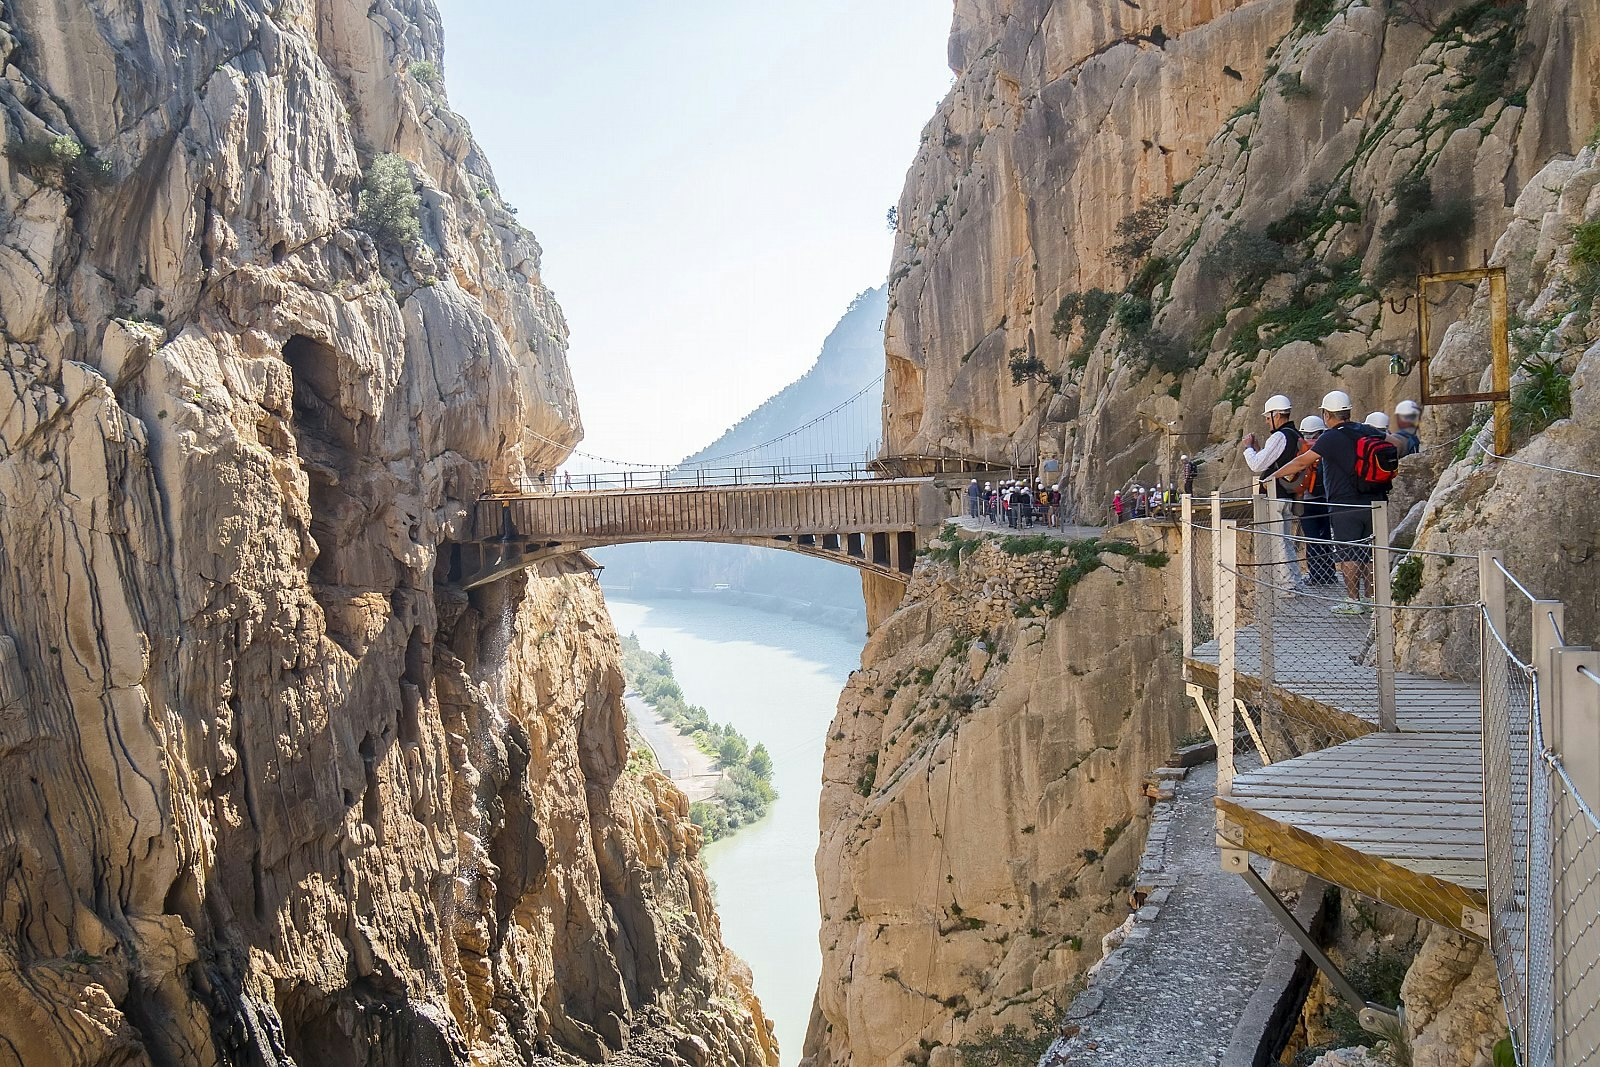 People in hard hats on a boardwalk snaking around a rocky cliff; up ahead the boardwalk crosses a narrow gorge to join the cliff on the opposite side, with a river far below.